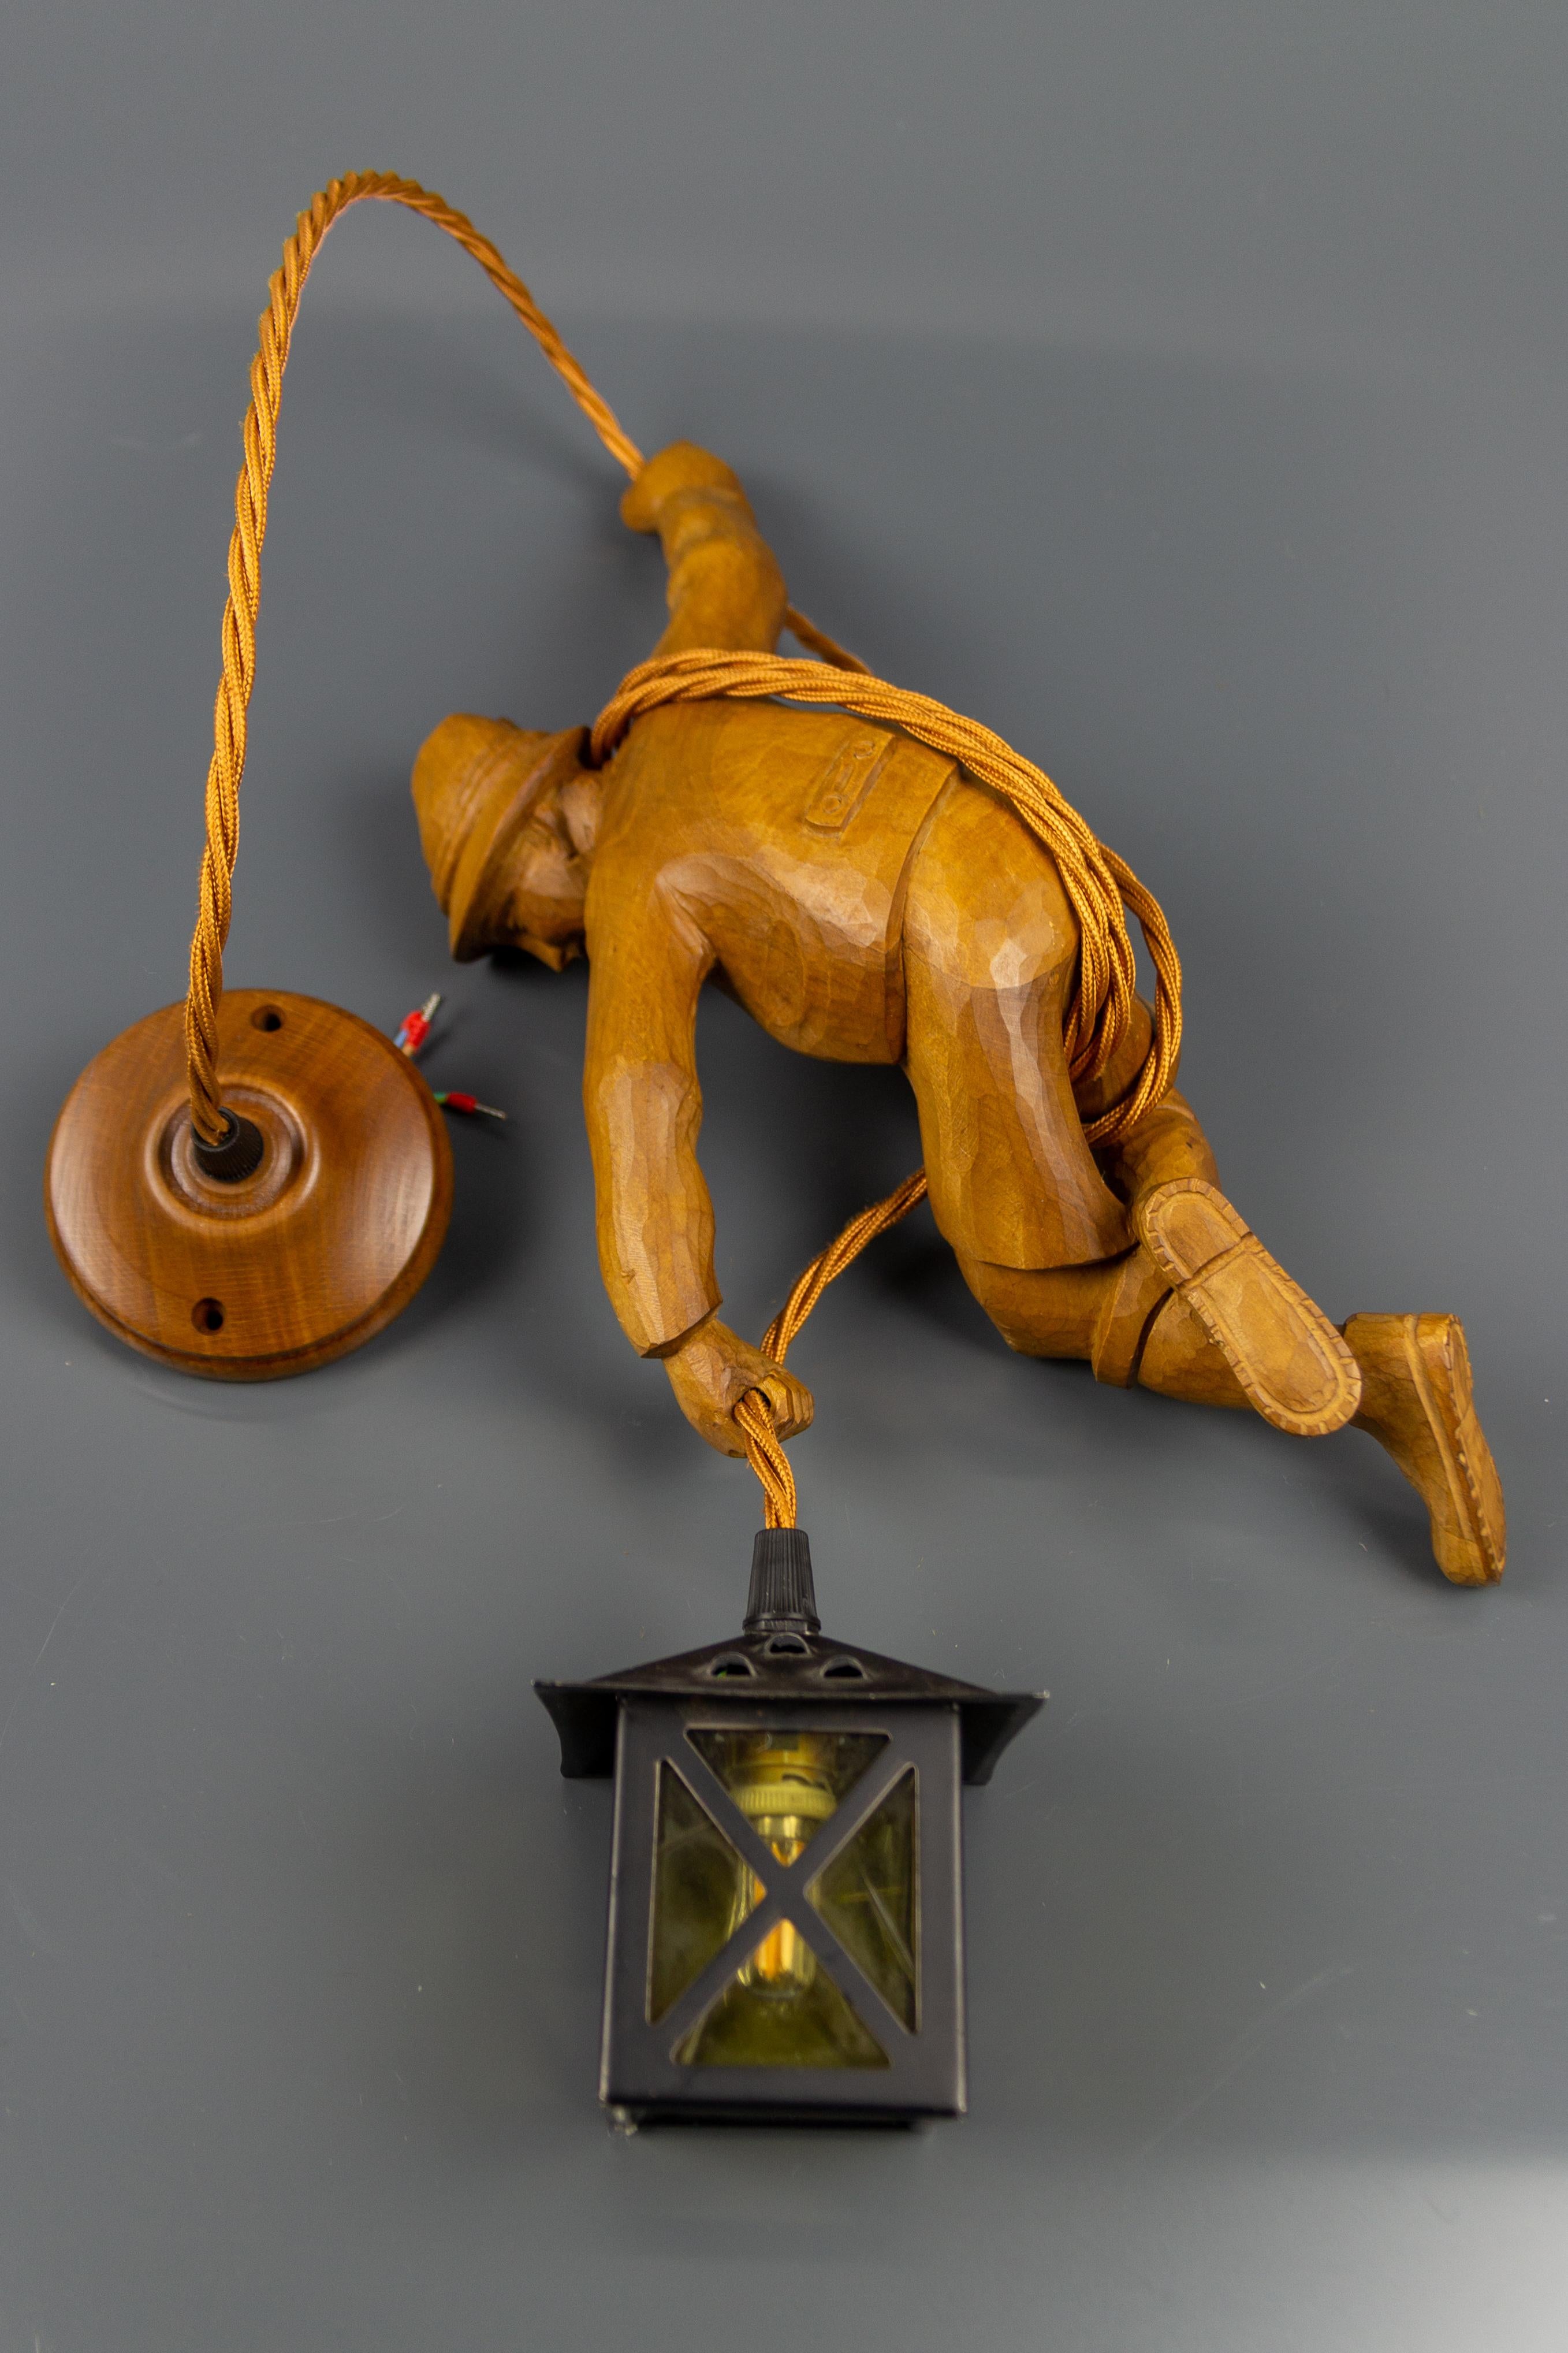 German Pendant Light Hand Carved Wooden Figure Mountain Climber with Lantern 11